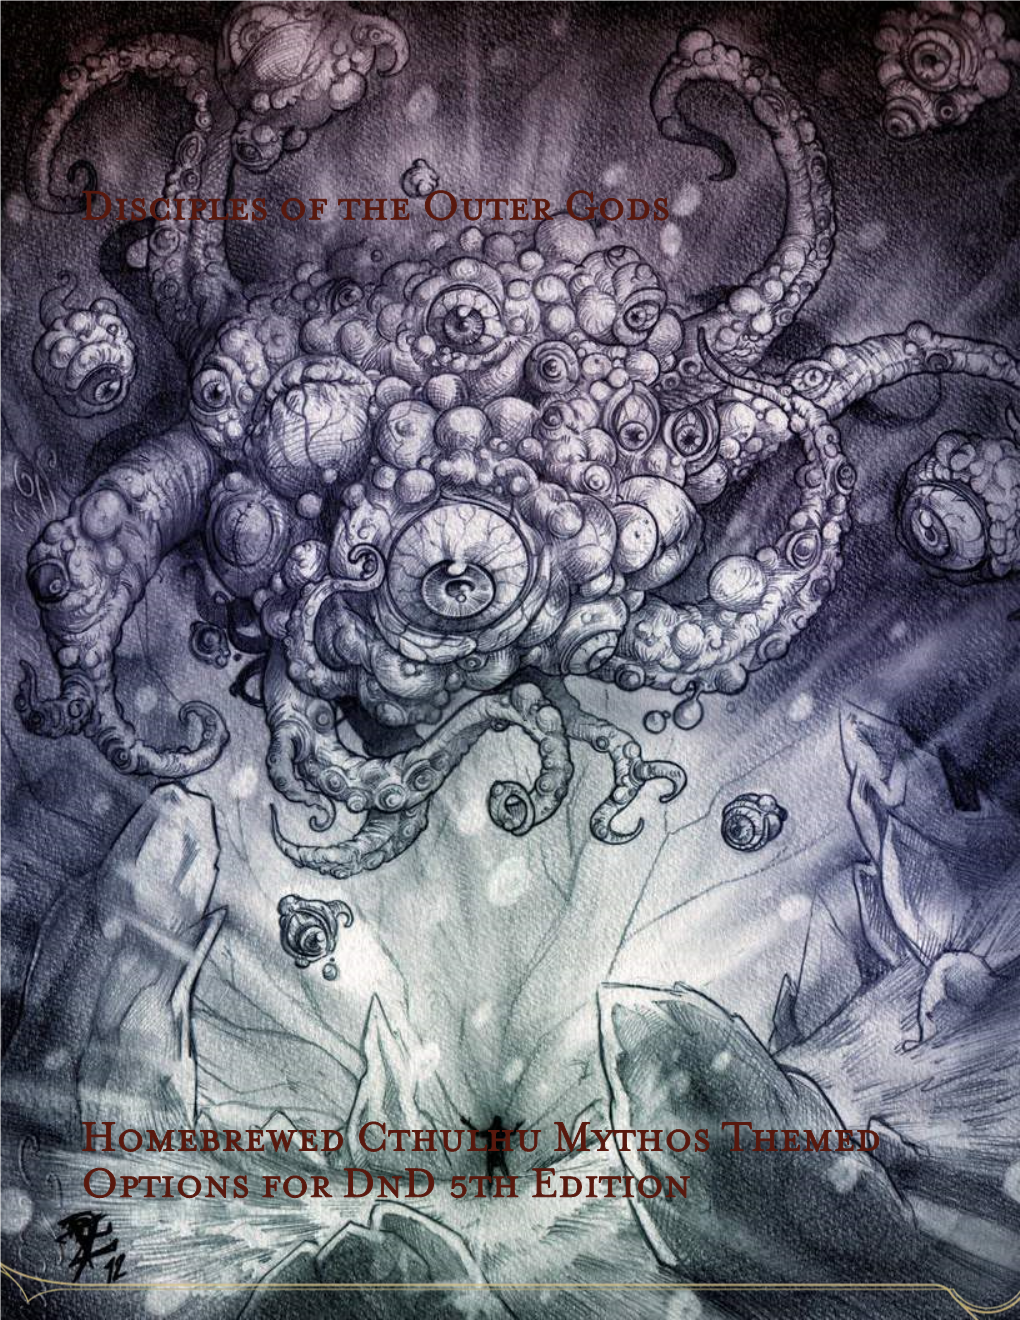 Disciples of the Outer Gods Homebrewed Cthulhu Mythos Themed Options for Dnd 5Th Edition